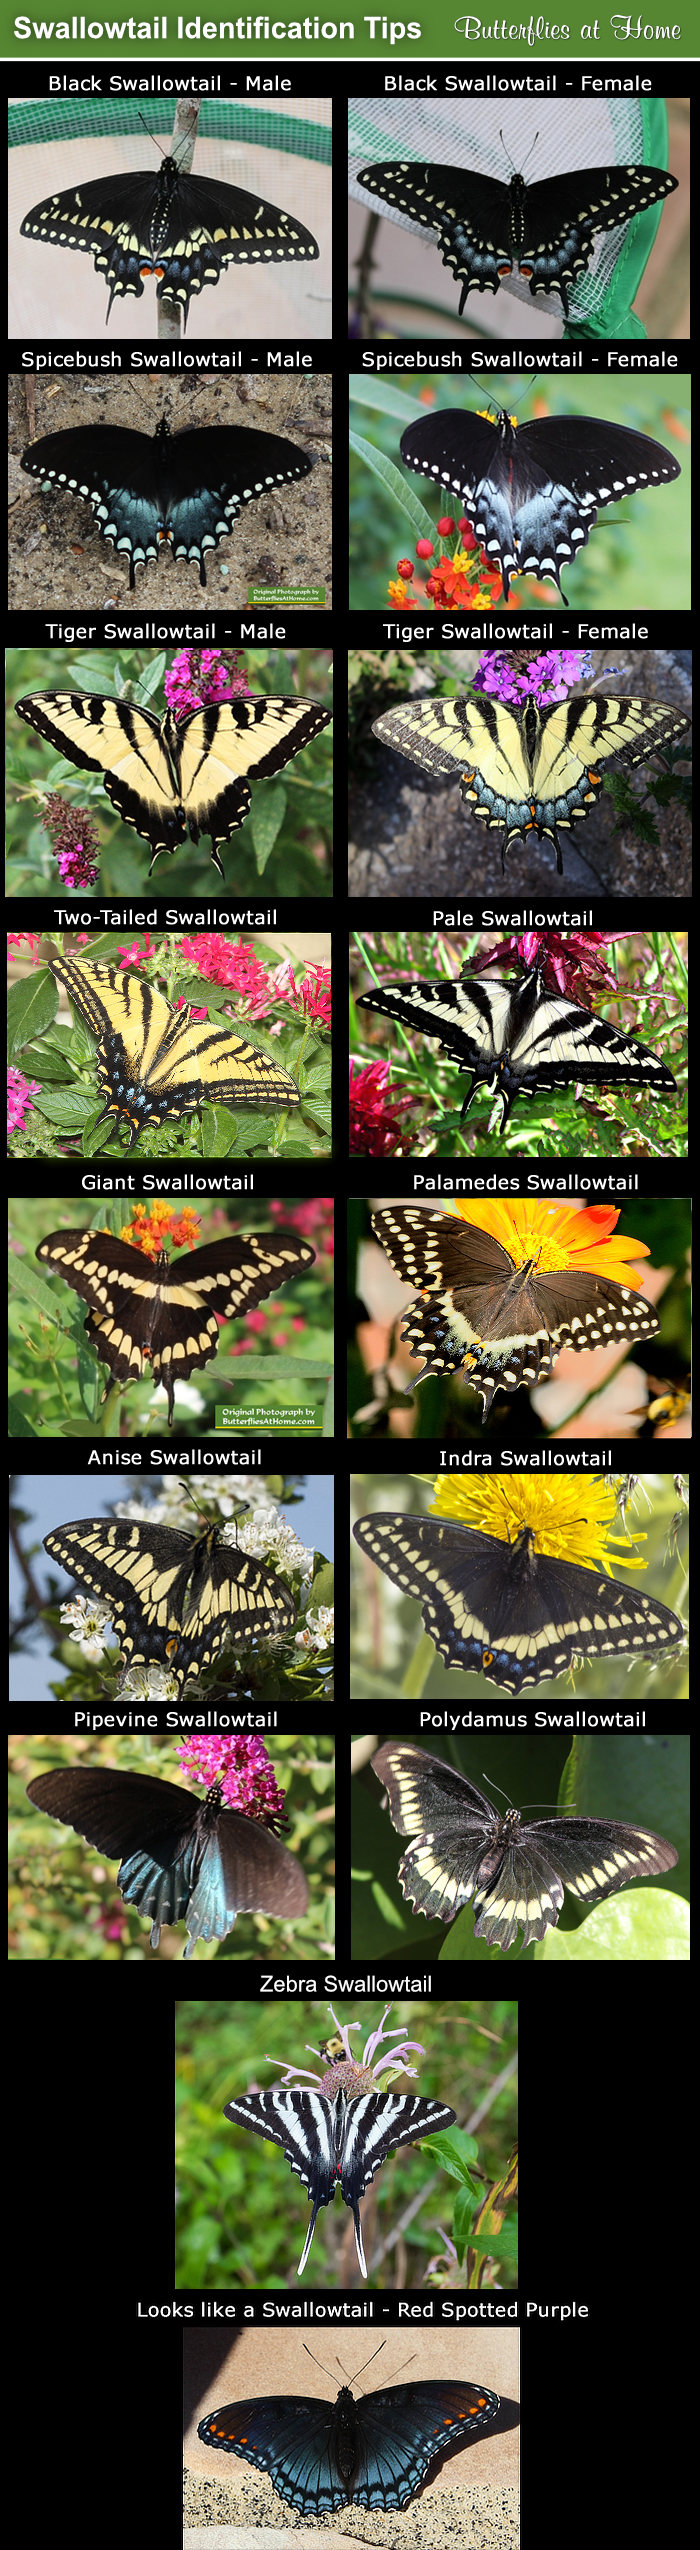 click for identification tips for the Swallowtail family of butterflies